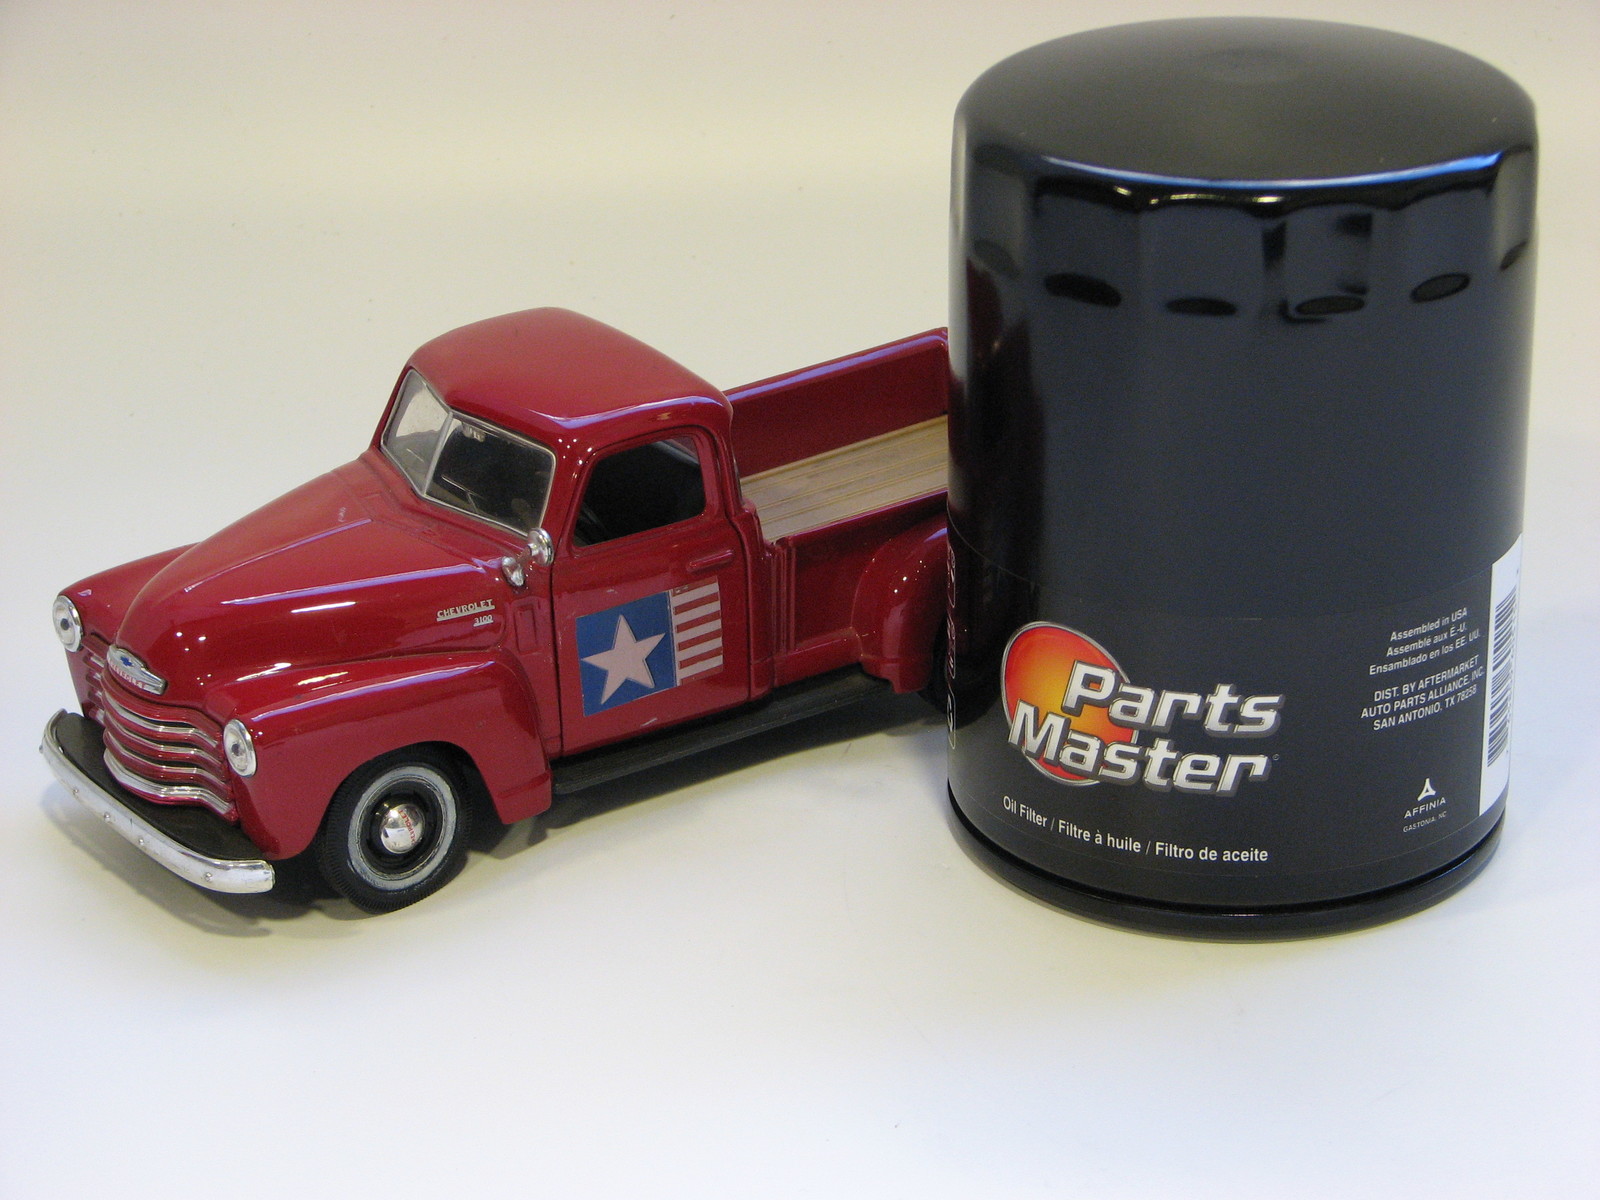 Parts Master Oil And Filters - Parts Master Oil and Filter